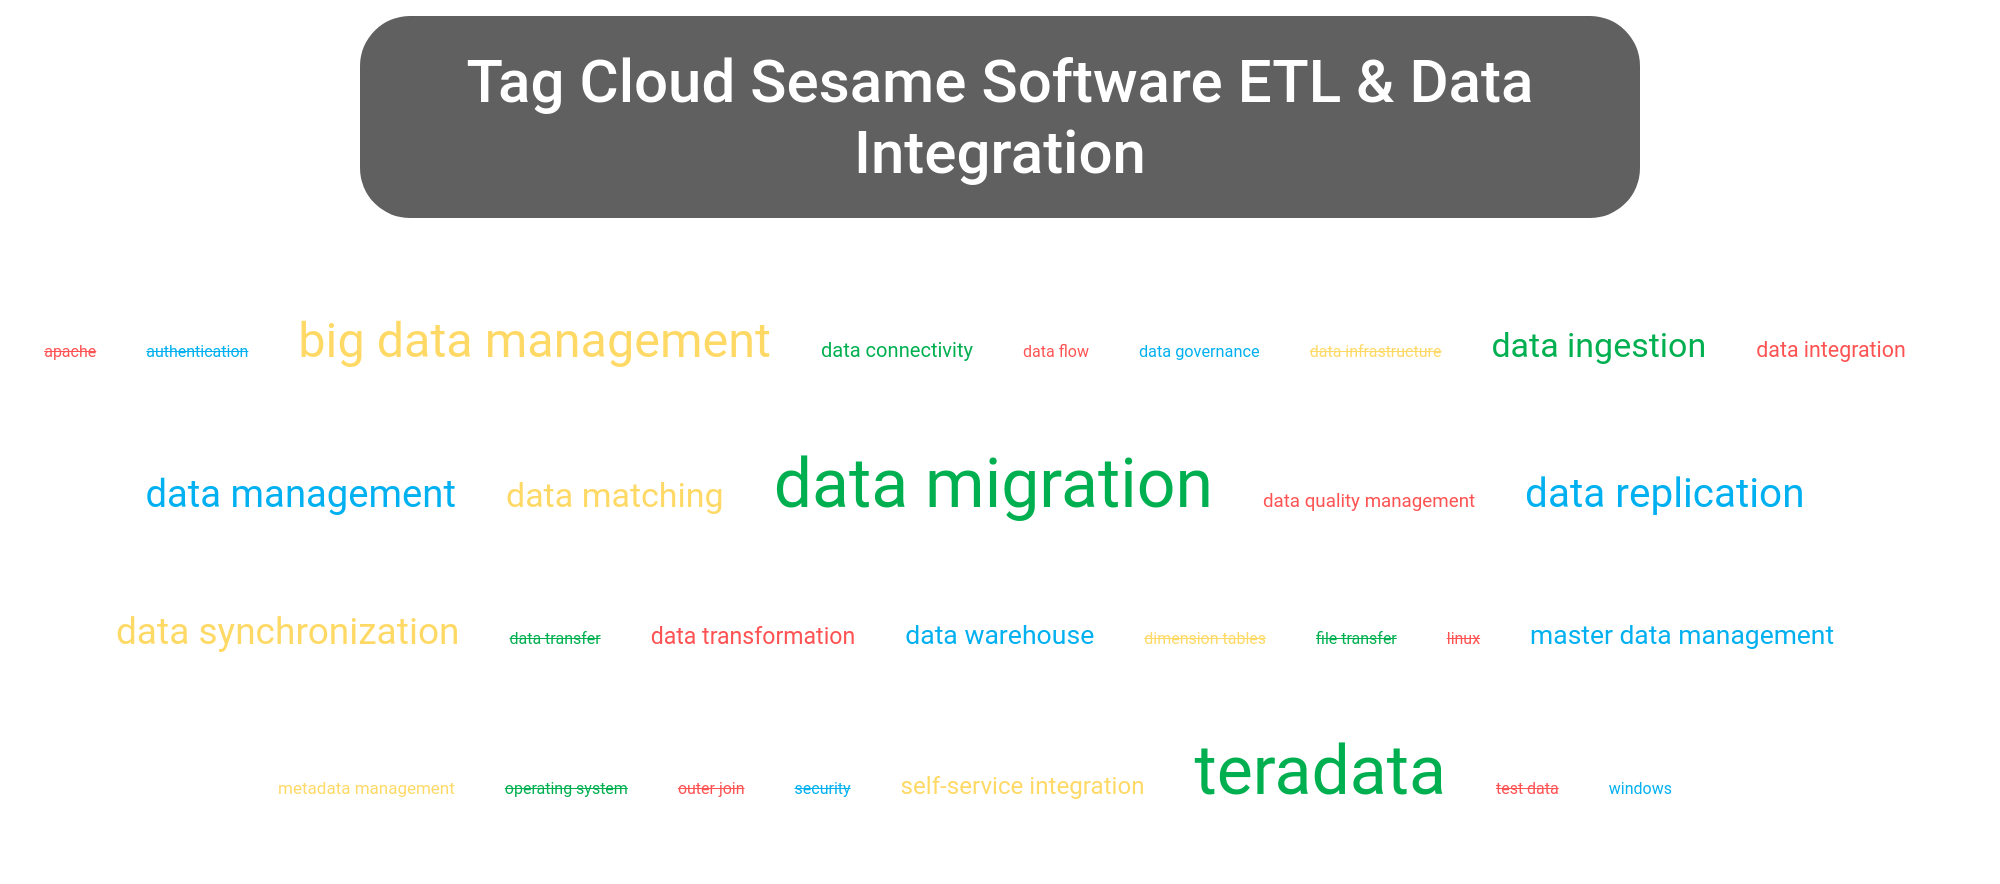 Tag cloud of the Sesame Software software.